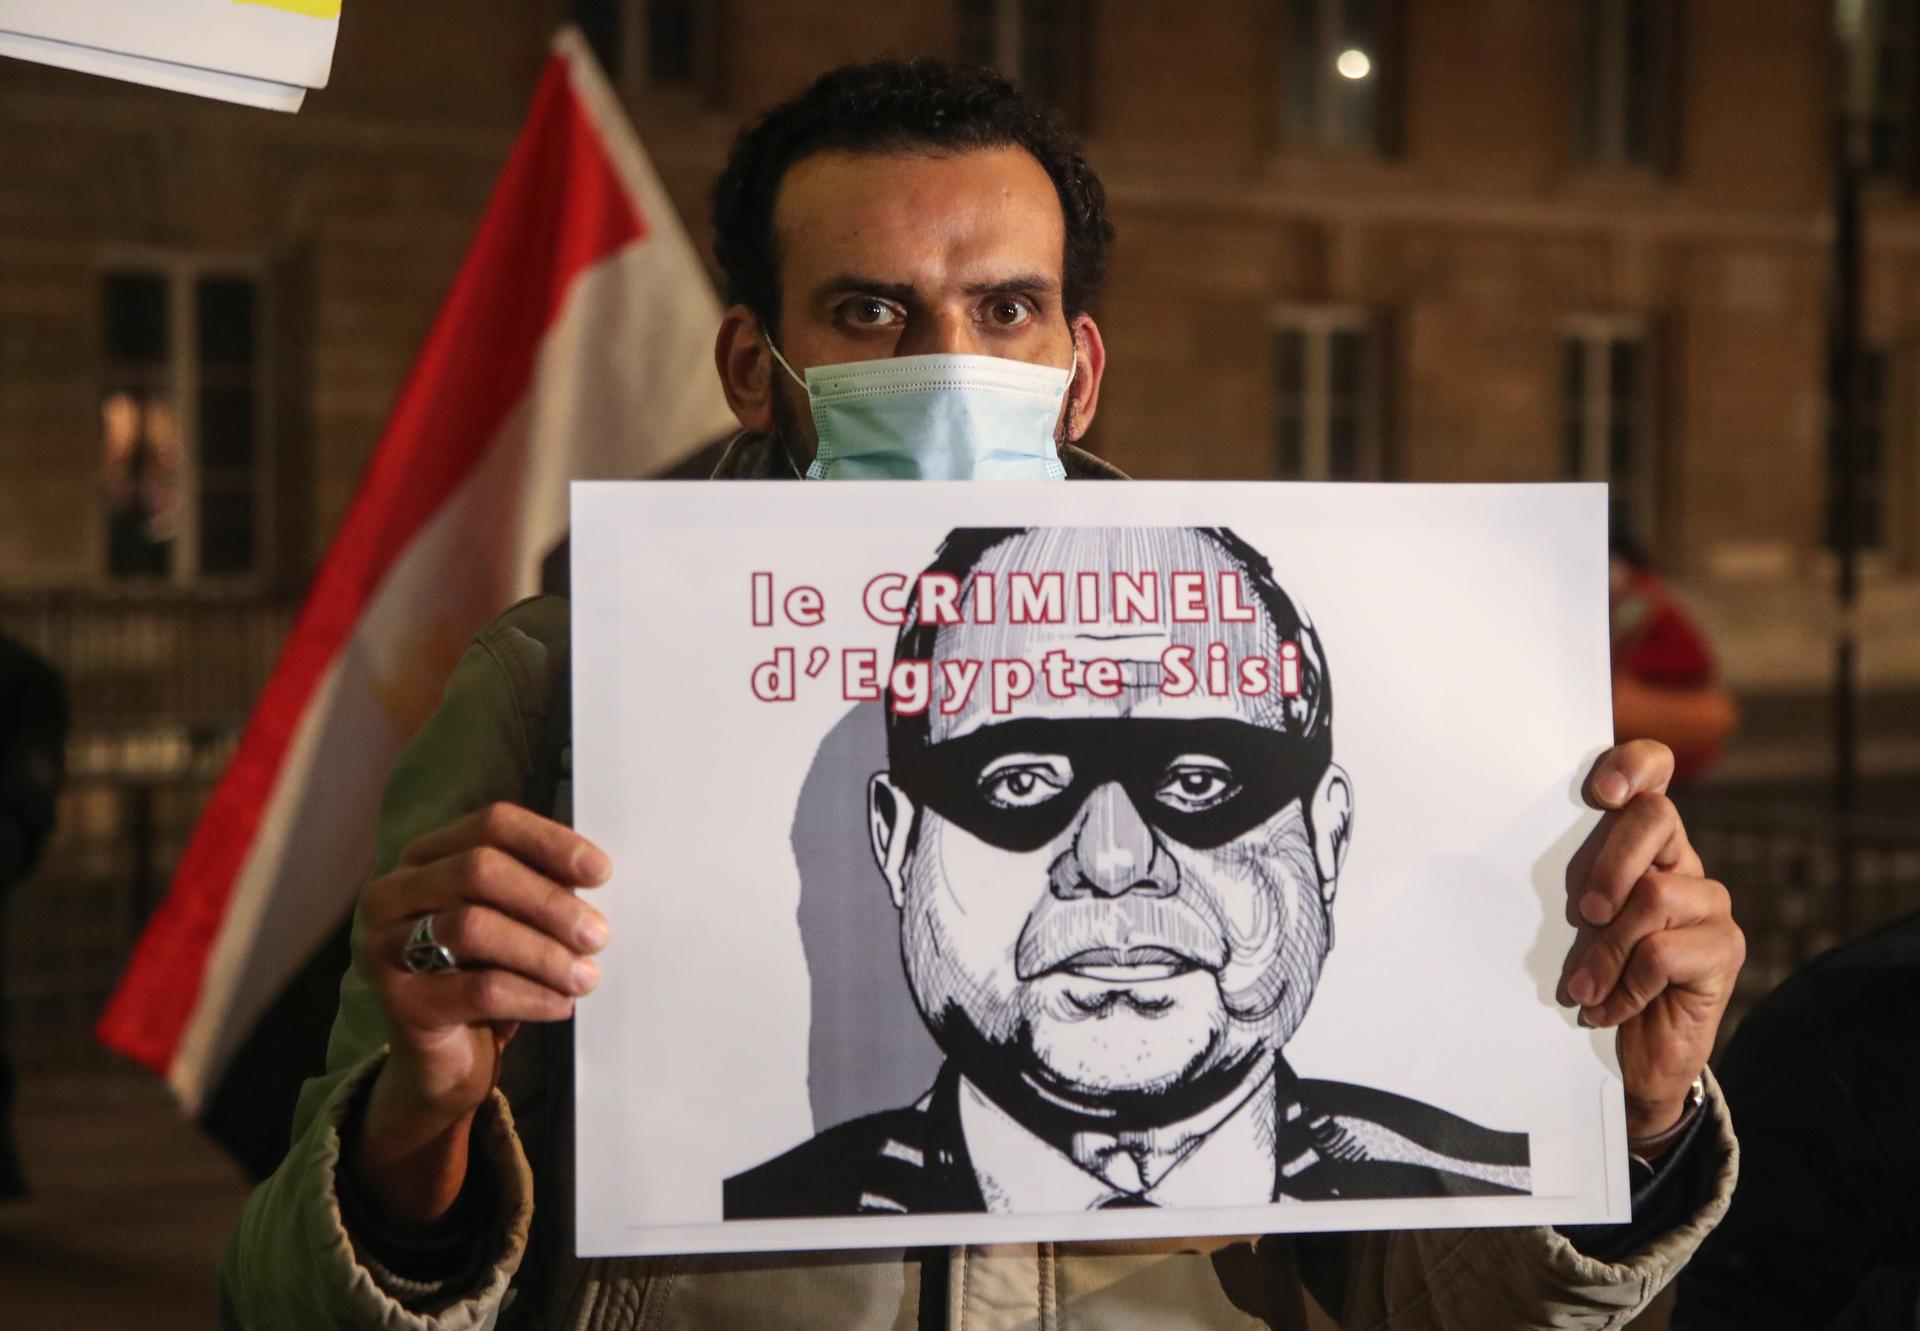 A man holds a placard depicting Egyptian President Abdul Fattah al-Sissi and reads he is a criminal as he stages a protest by the National Assembly in Paris, Dec. 8, 2020. 